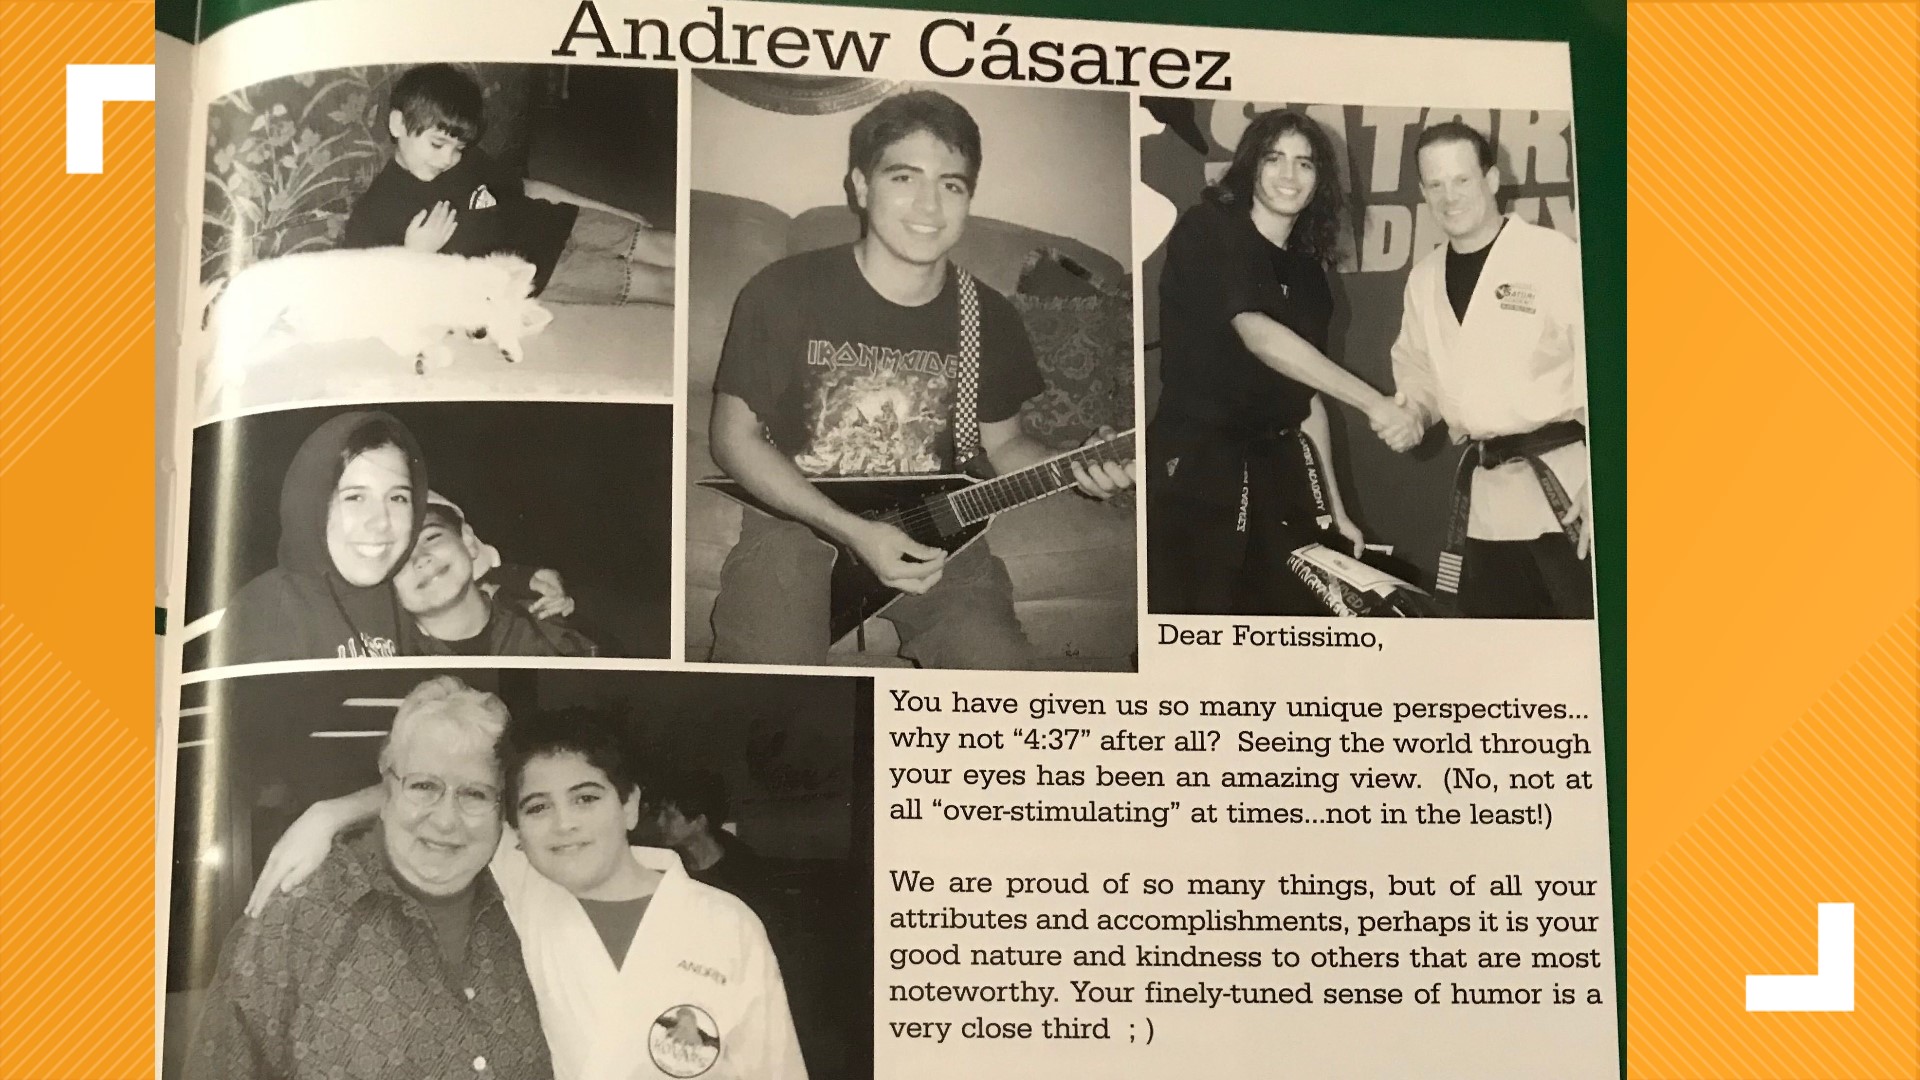 Andrew Casarez is the alleged leader of an online hate group called "Bowl Patrol," named after Dylann Roof.